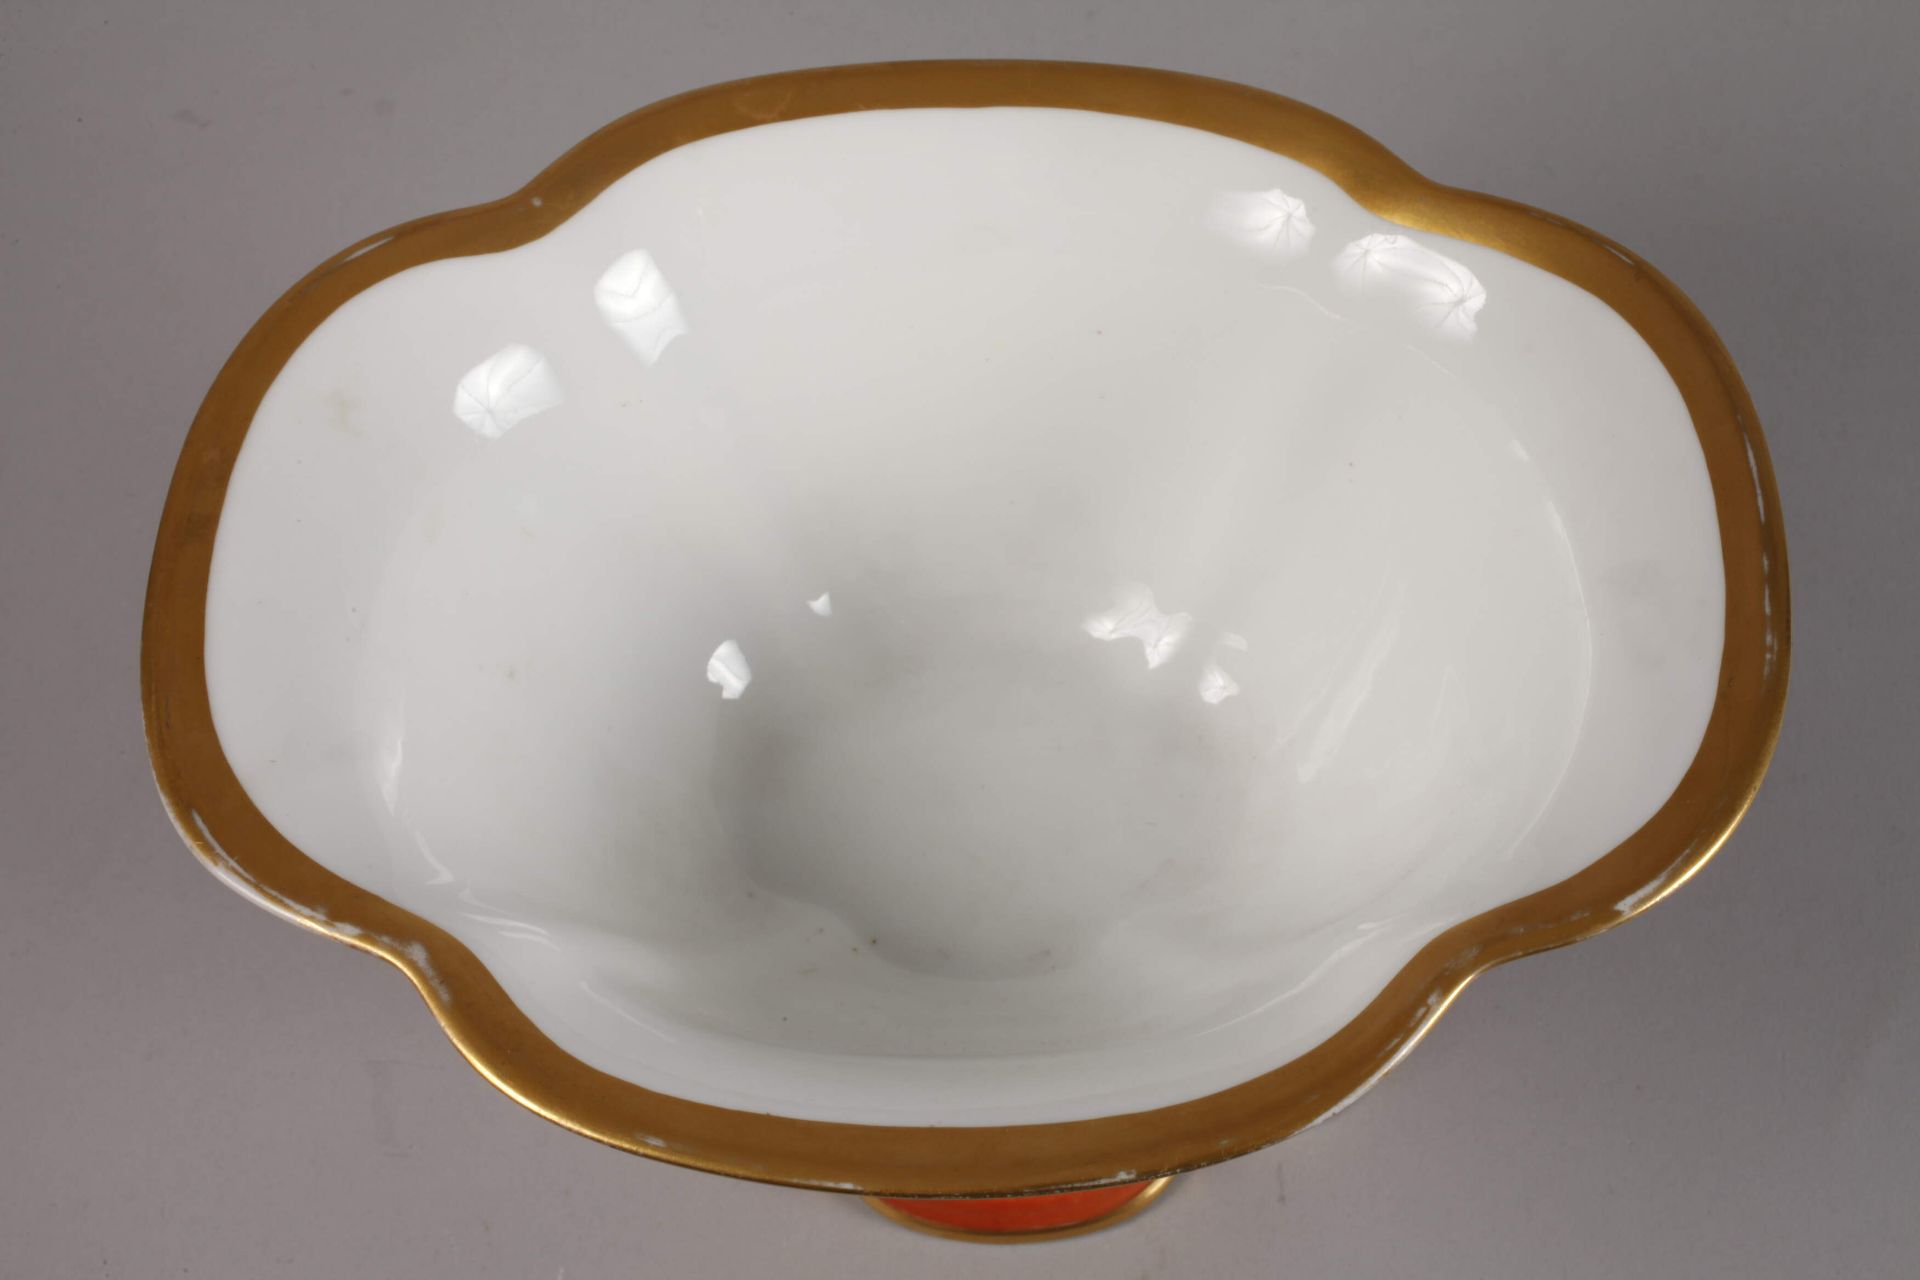 Hutschenreuther Art Deco top bowl - Image 4 of 4